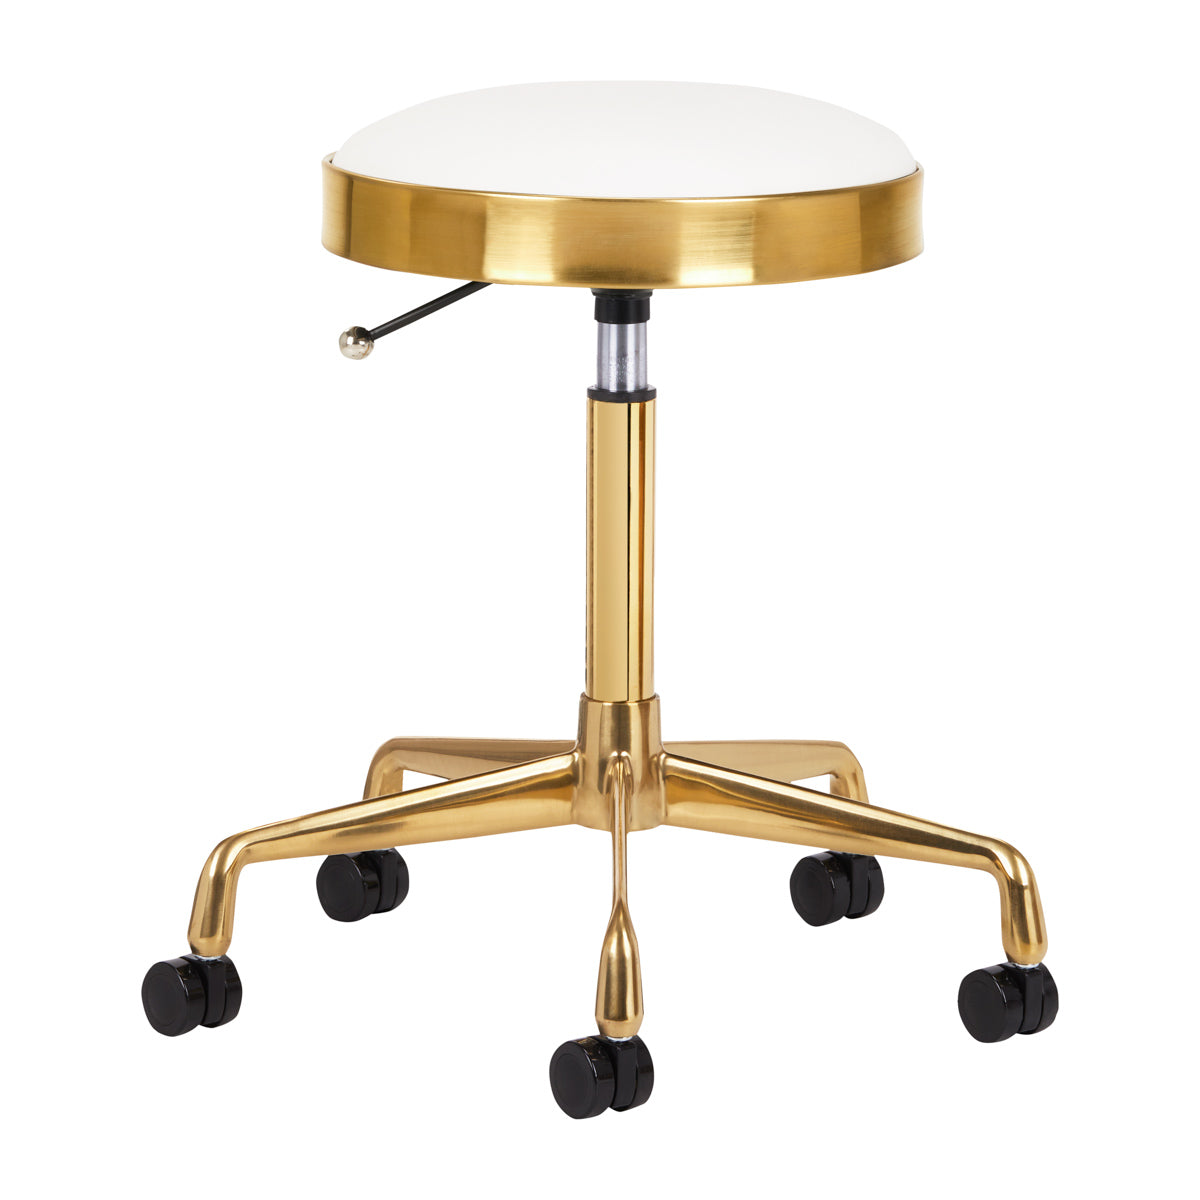 ACTIVESHOP COSMETIC STOOL H7 GOLDEN WHITE